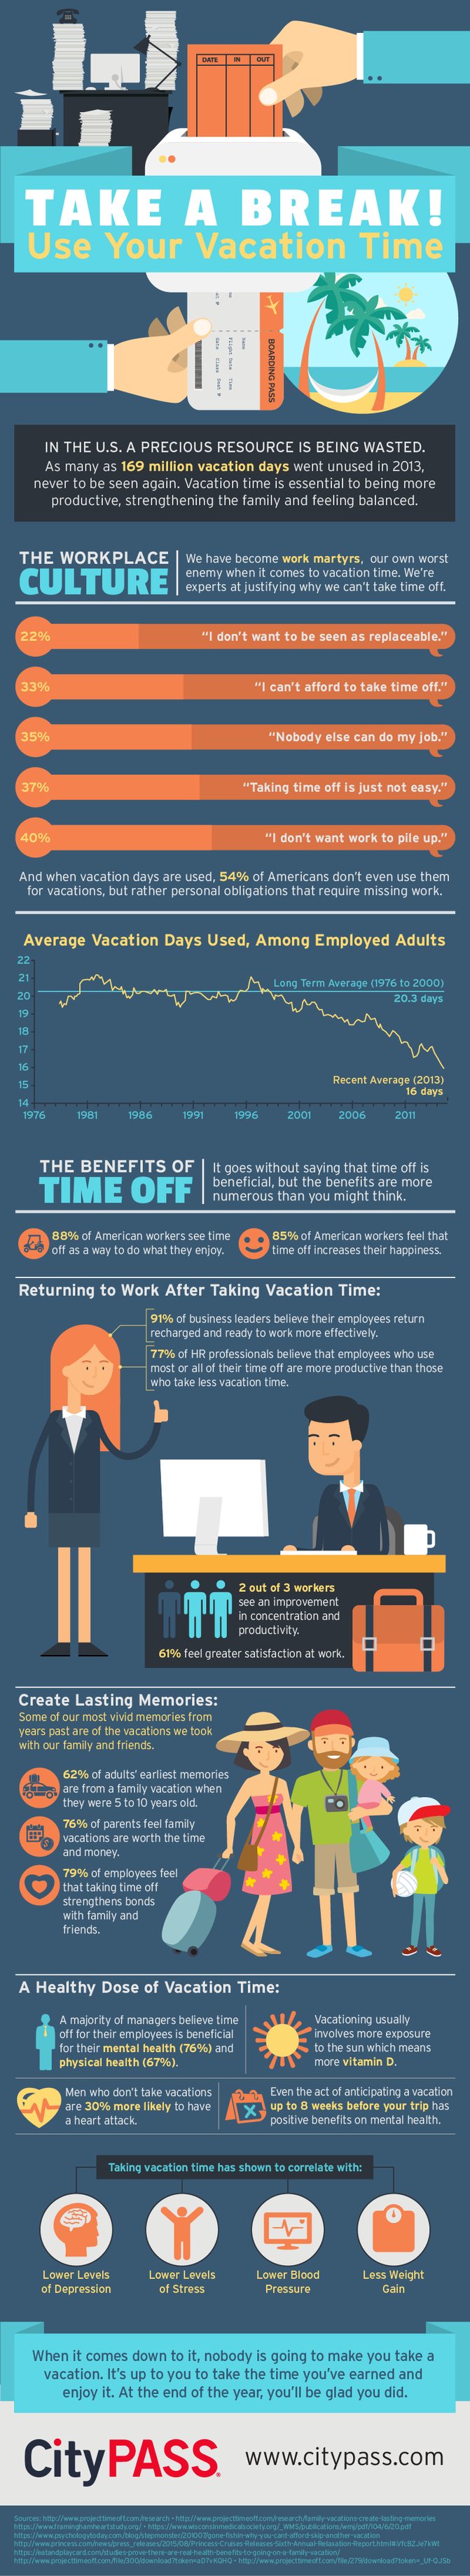 how to use vacation time at amazon